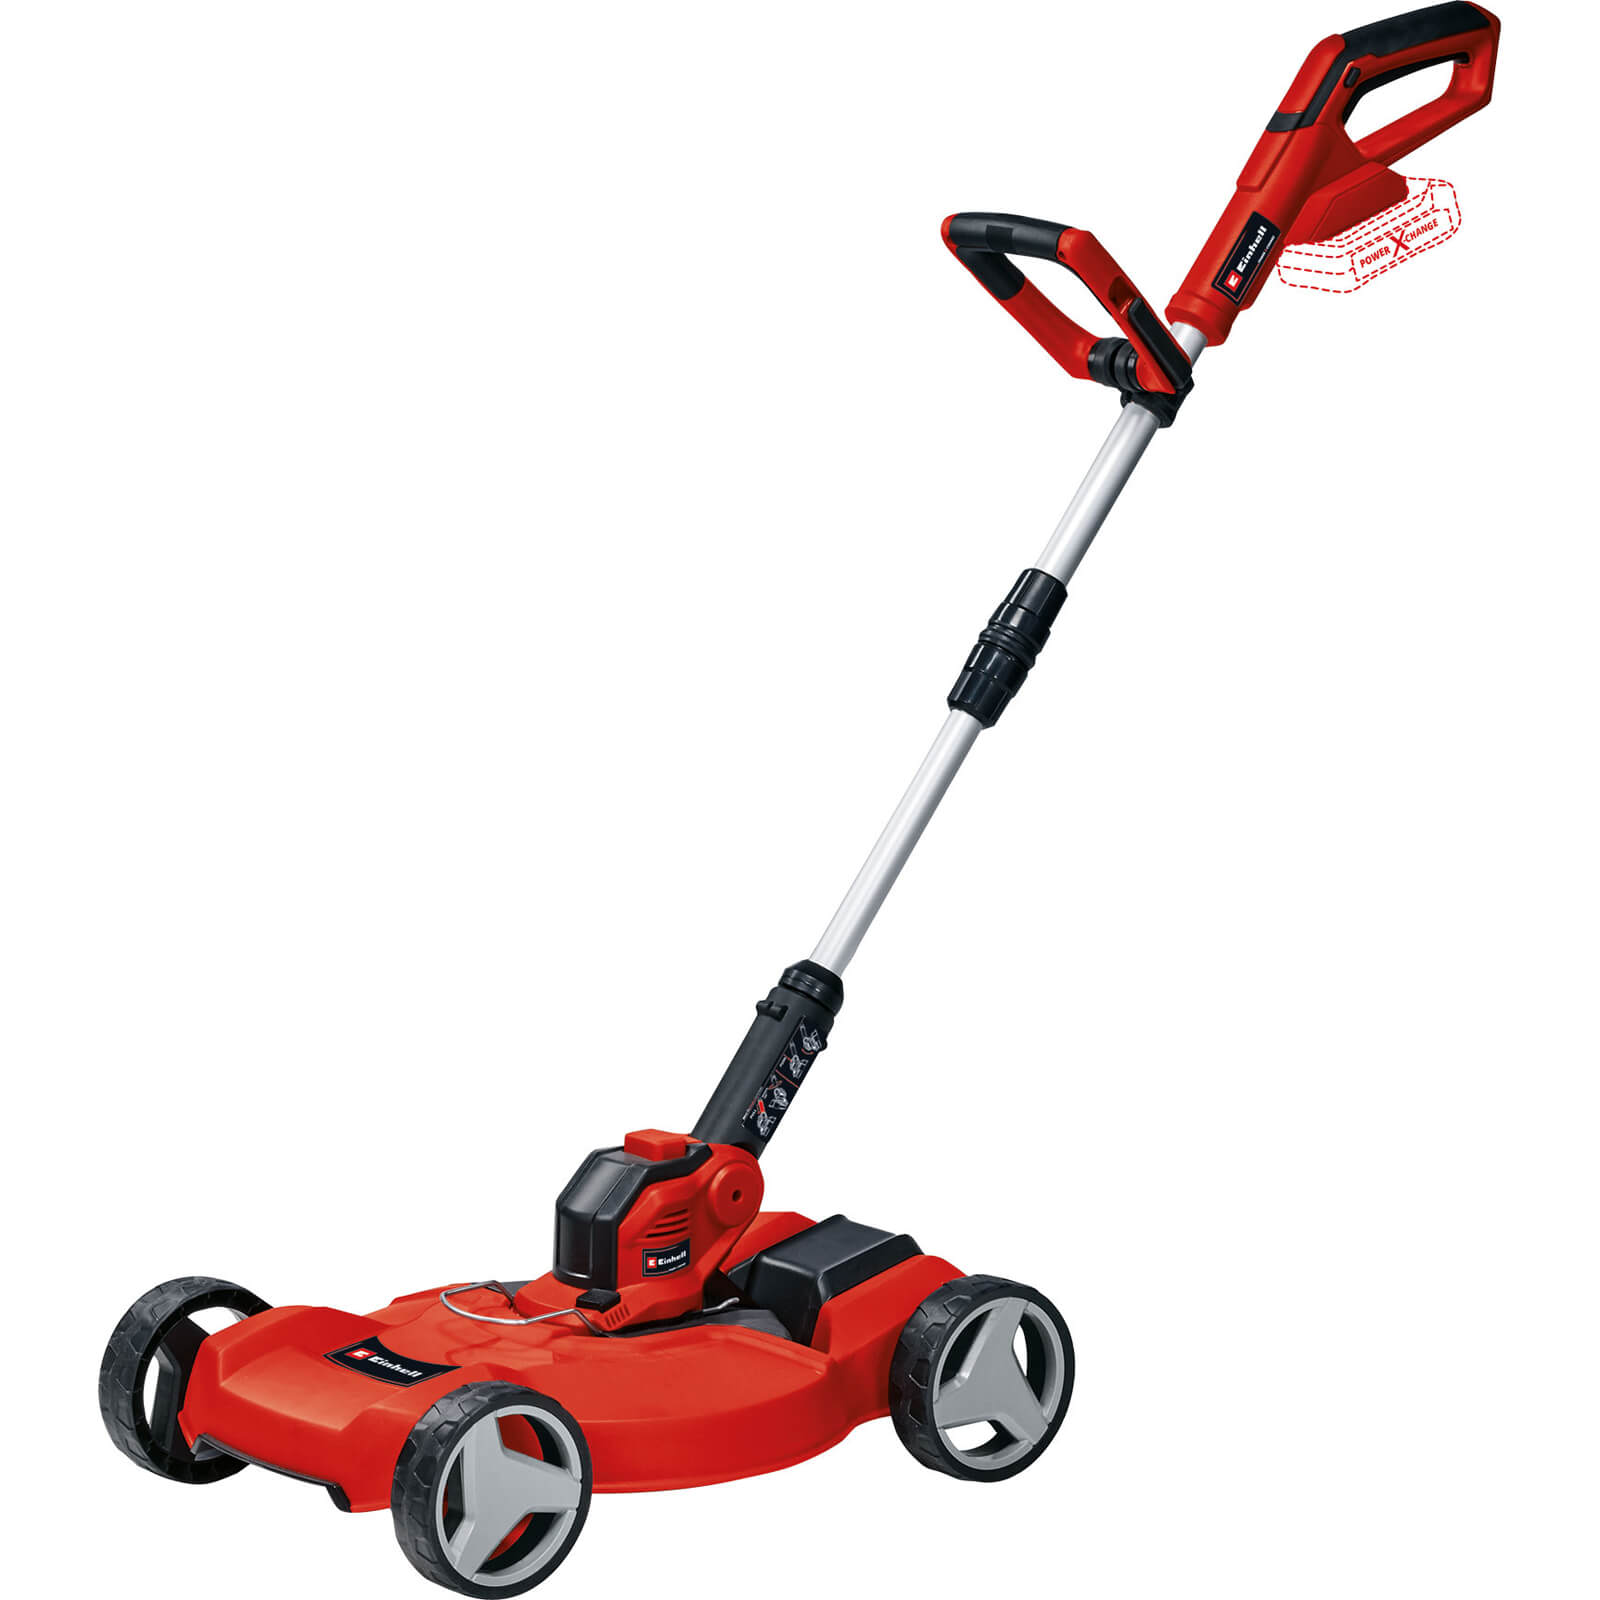 Einhell GE-CT 18/28 Li TC 18v Cordless Grass Trimmer and Edger 280mm No Batteries No Charger